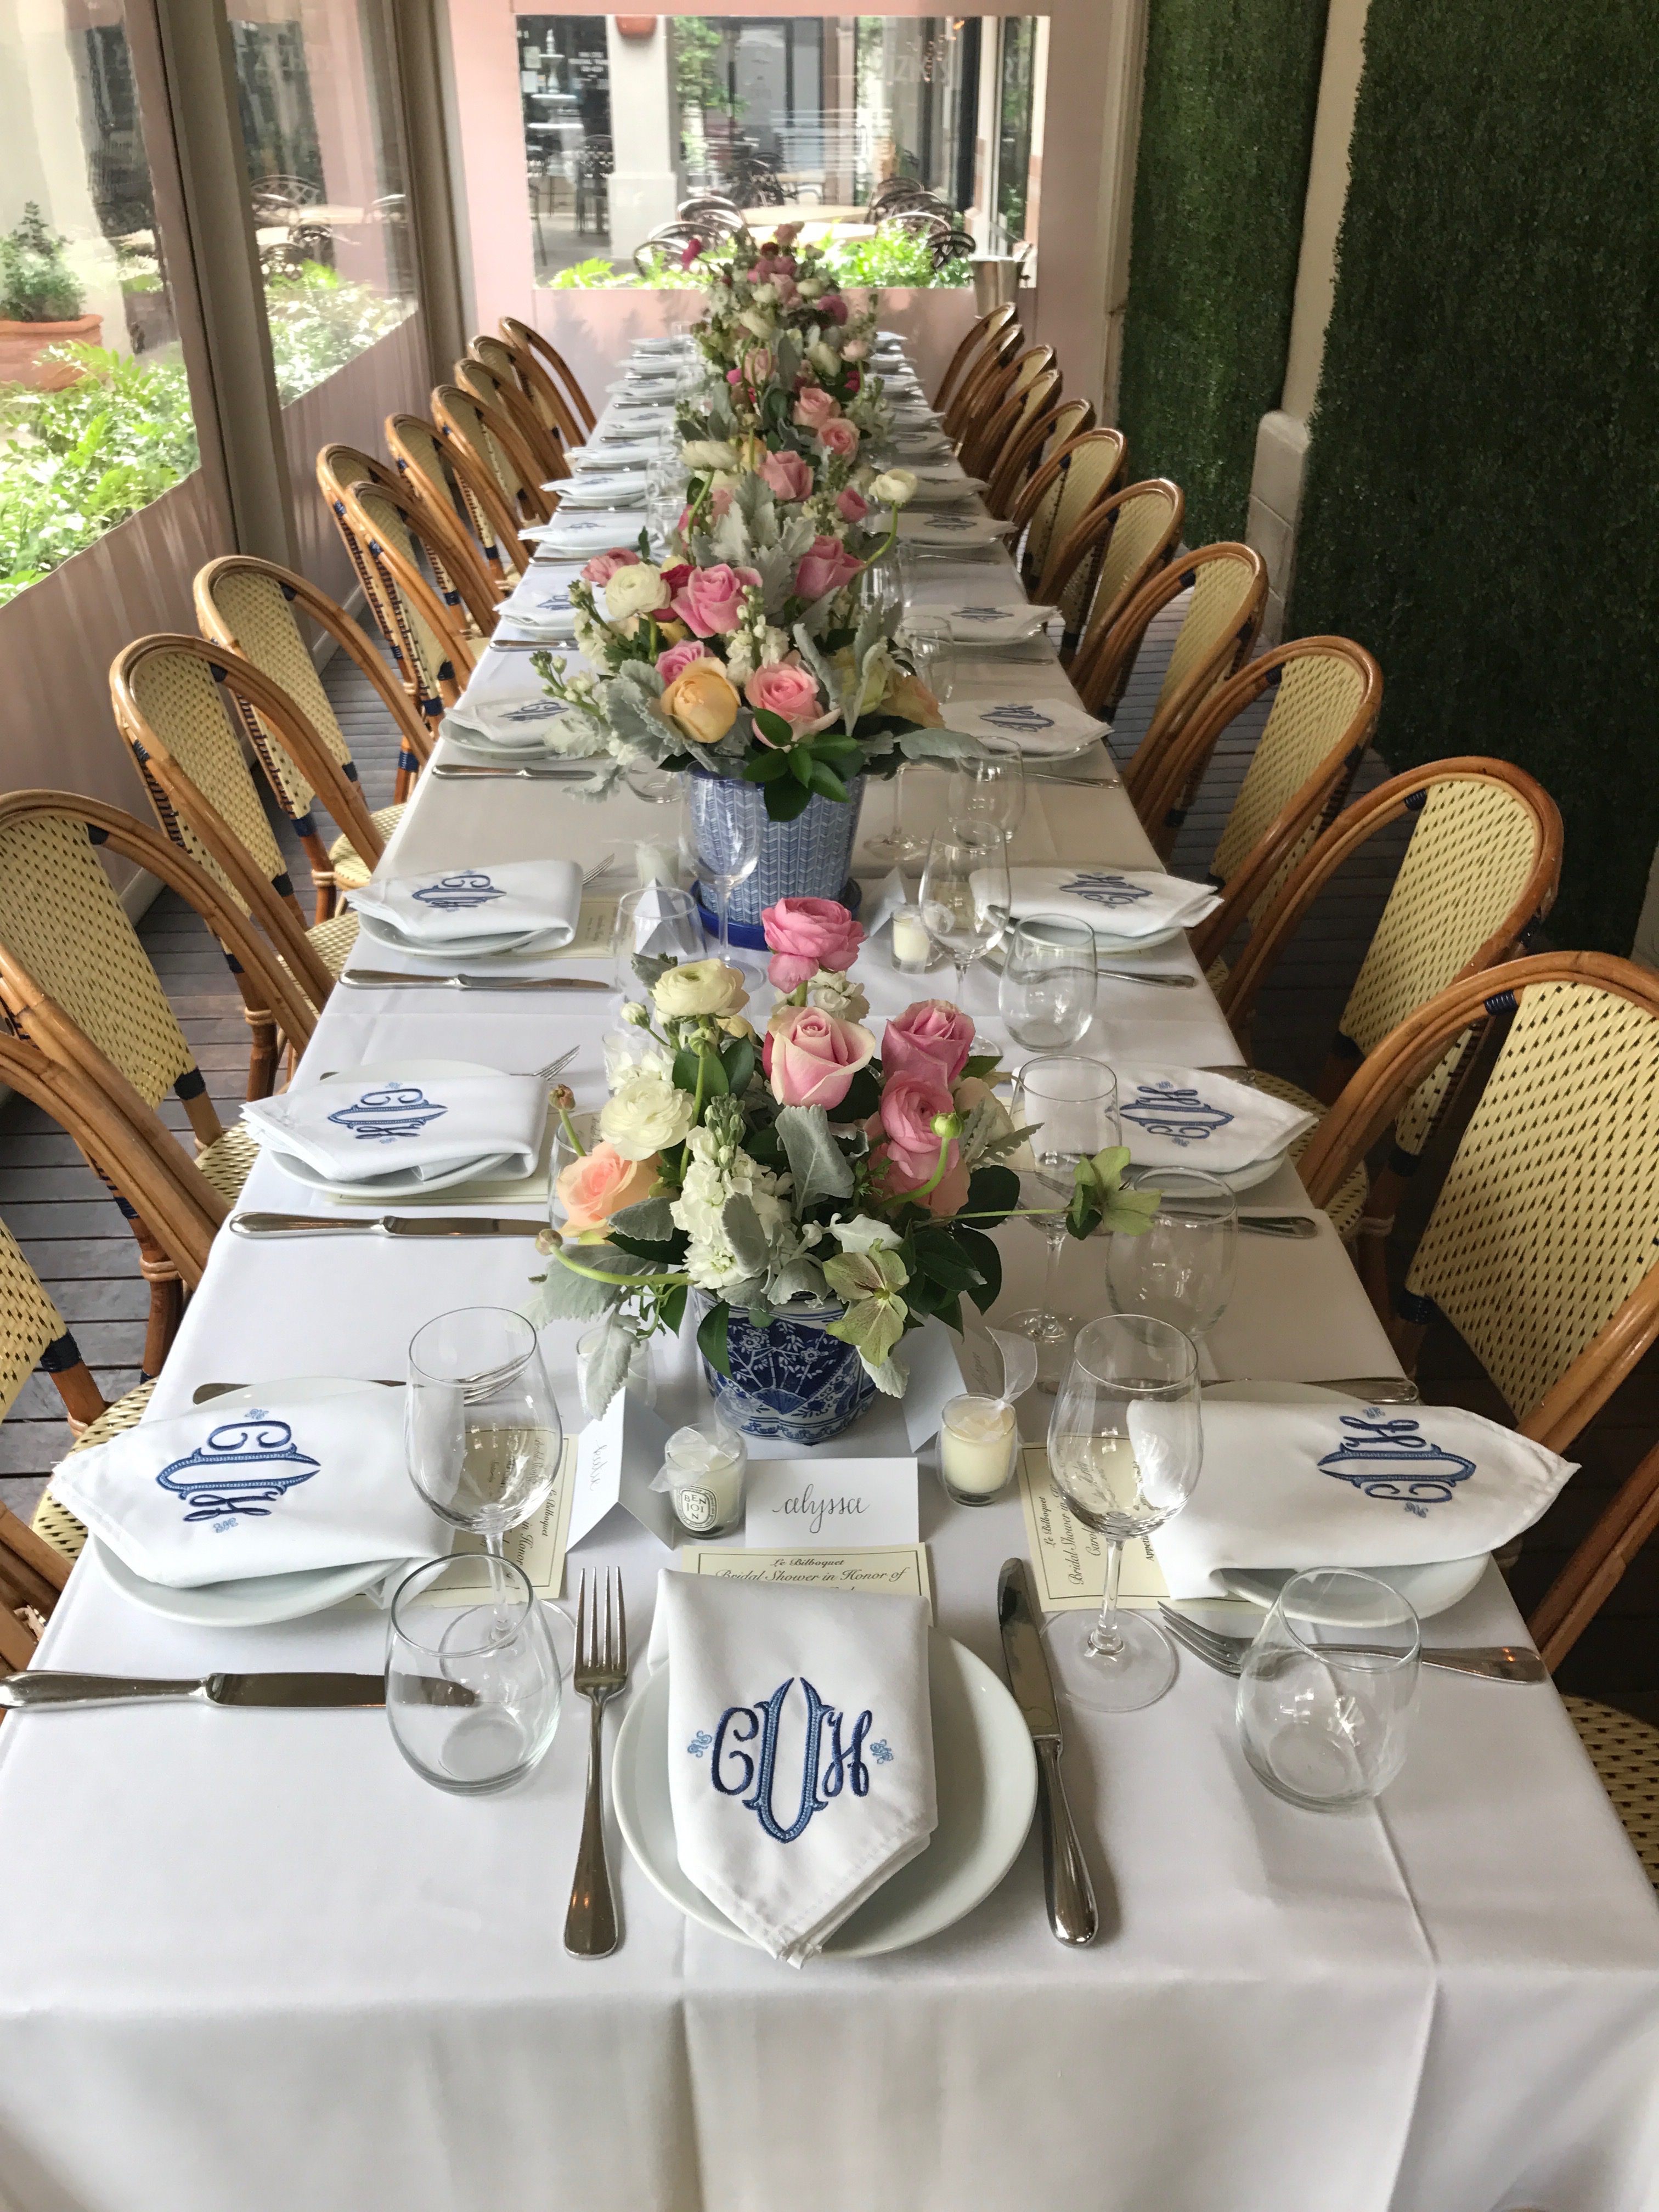 Bridal Shower by Christina Dandar for The Potted Boxwood 21